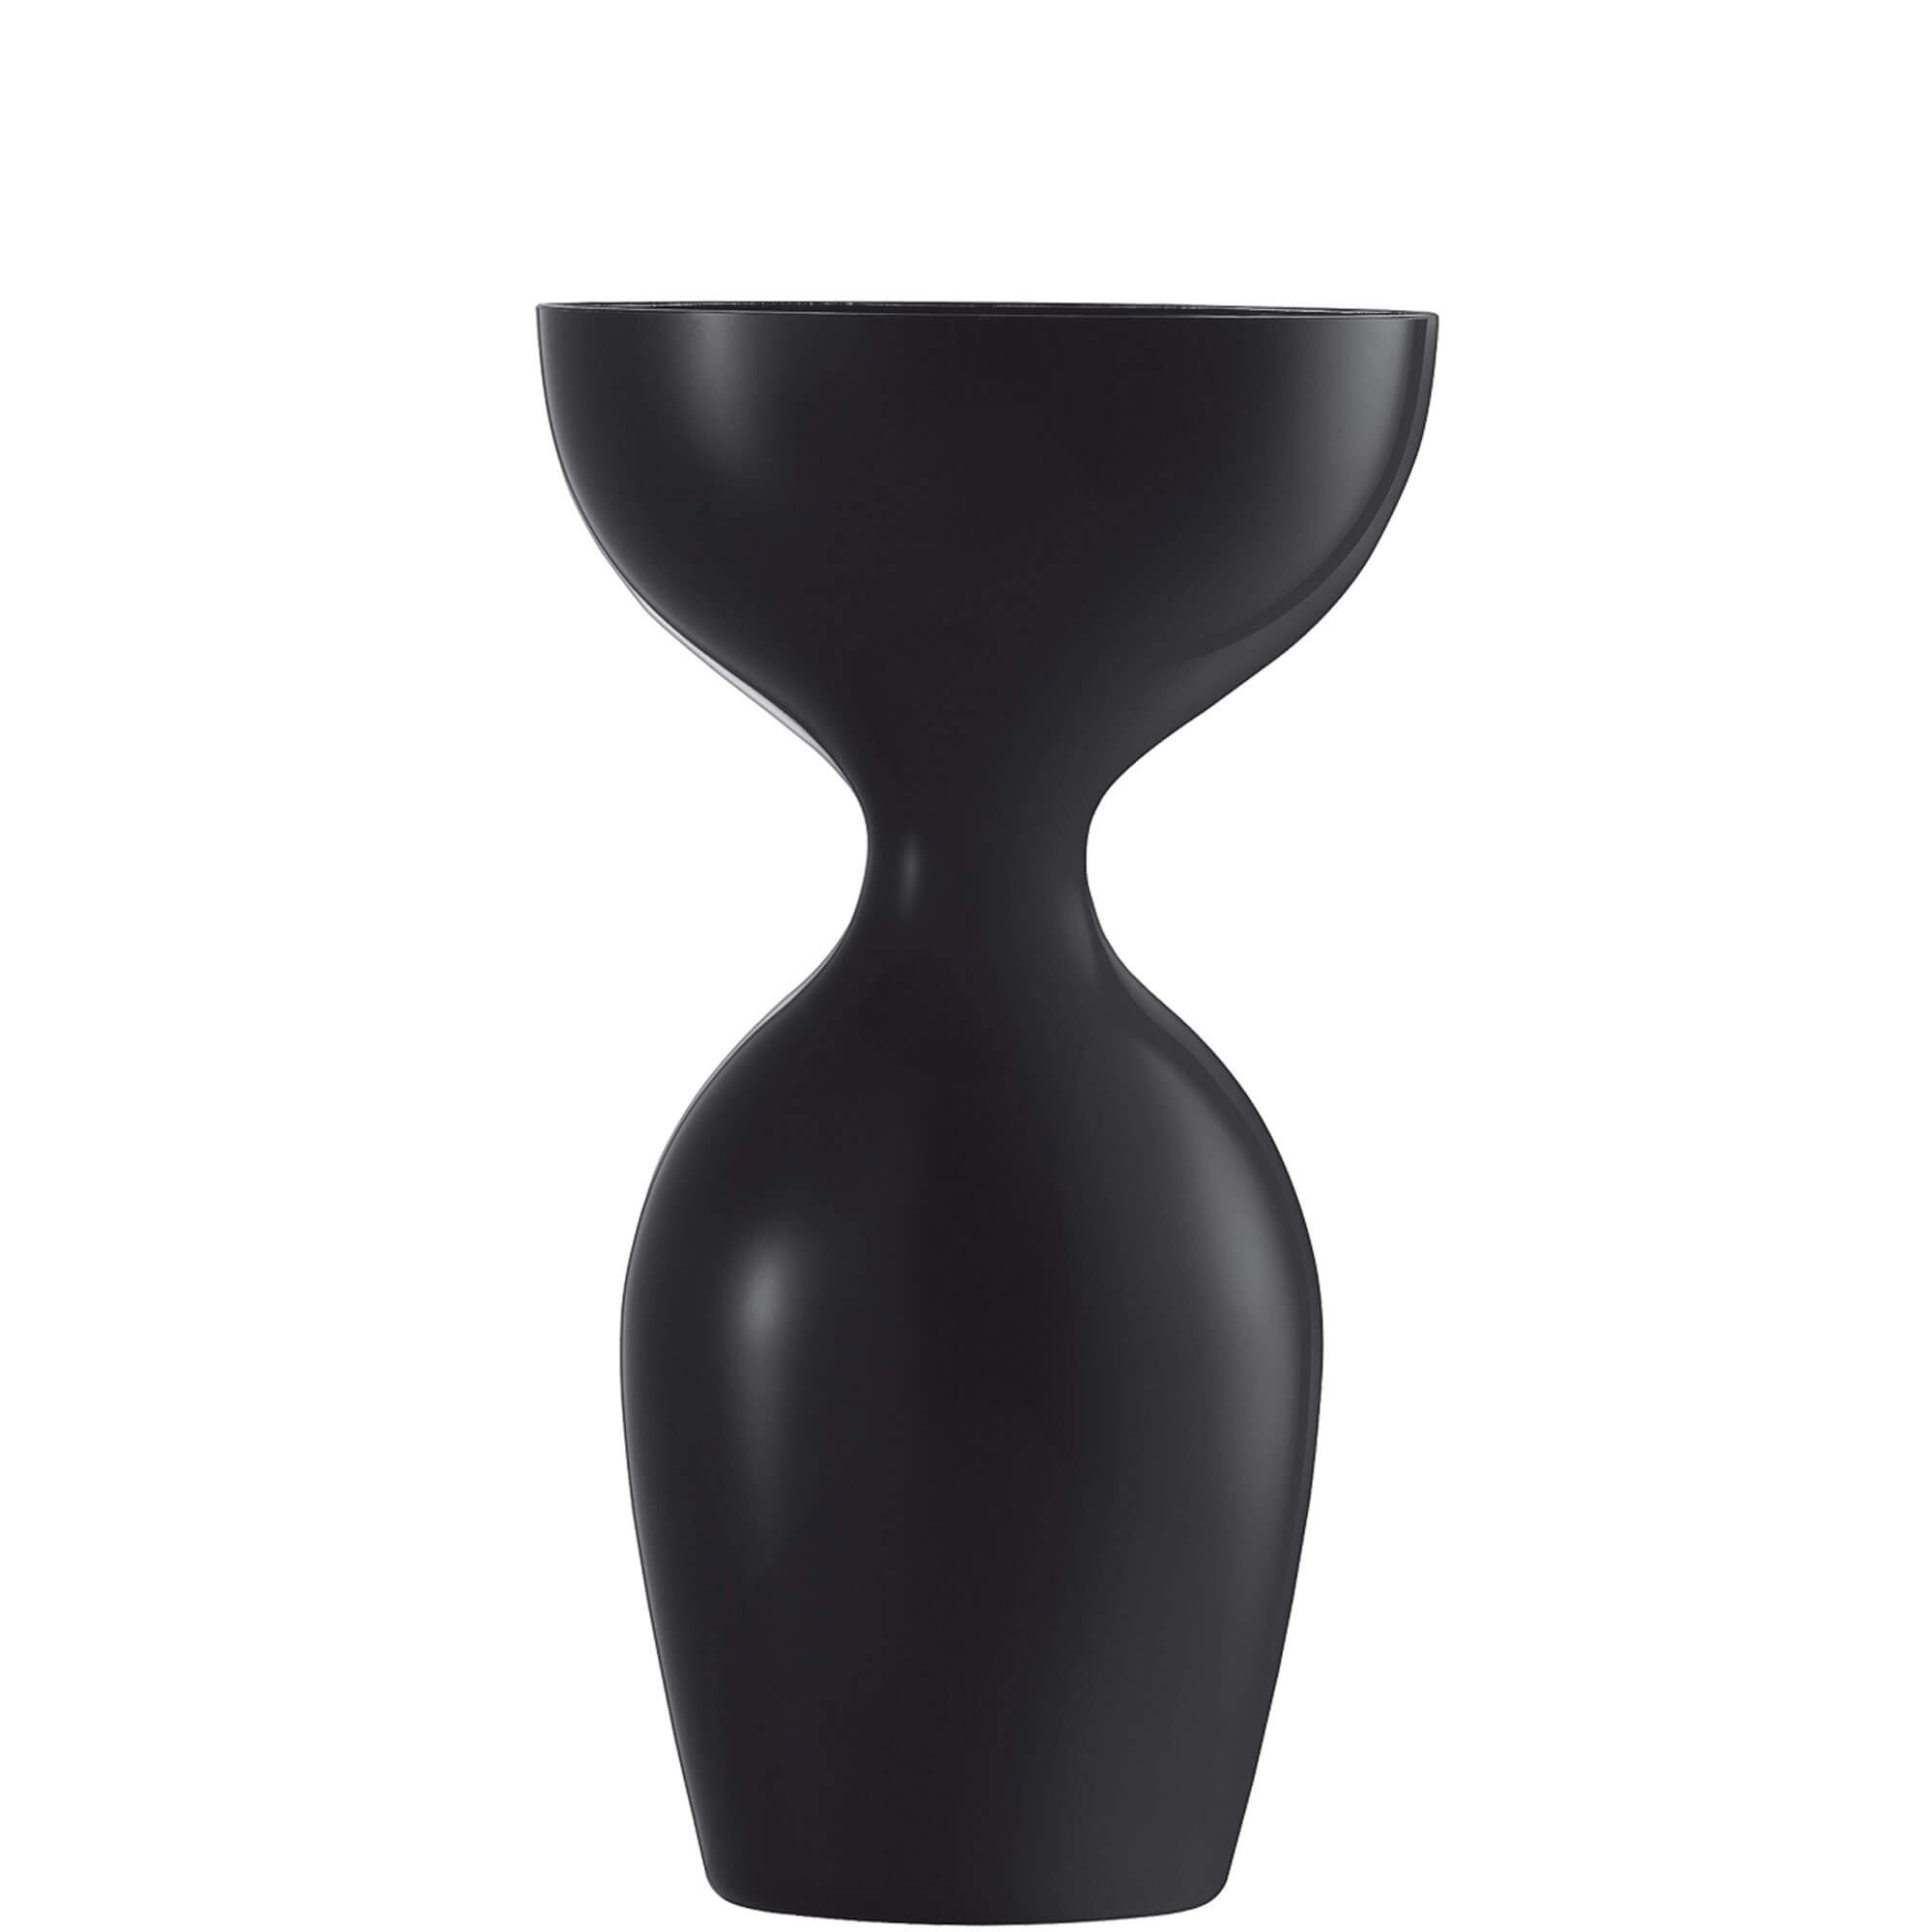 Spittoon for wine tasting, Zwiesel Glas - small